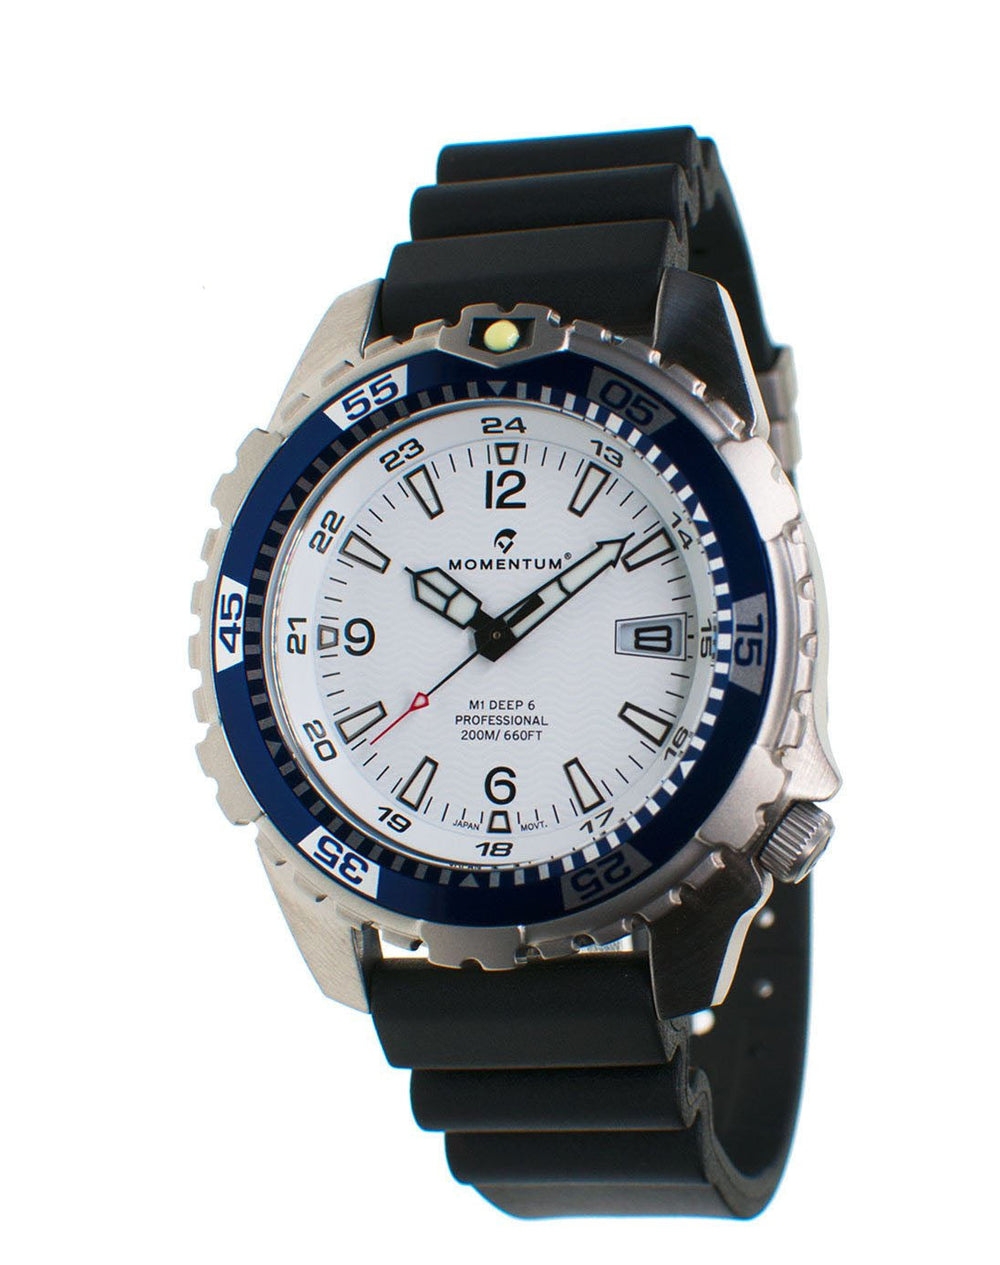 Momentum Momentum M1 DEEP 6, SS, LRG, WHITE, BLACK RUBBER by Oyster Diving Shop